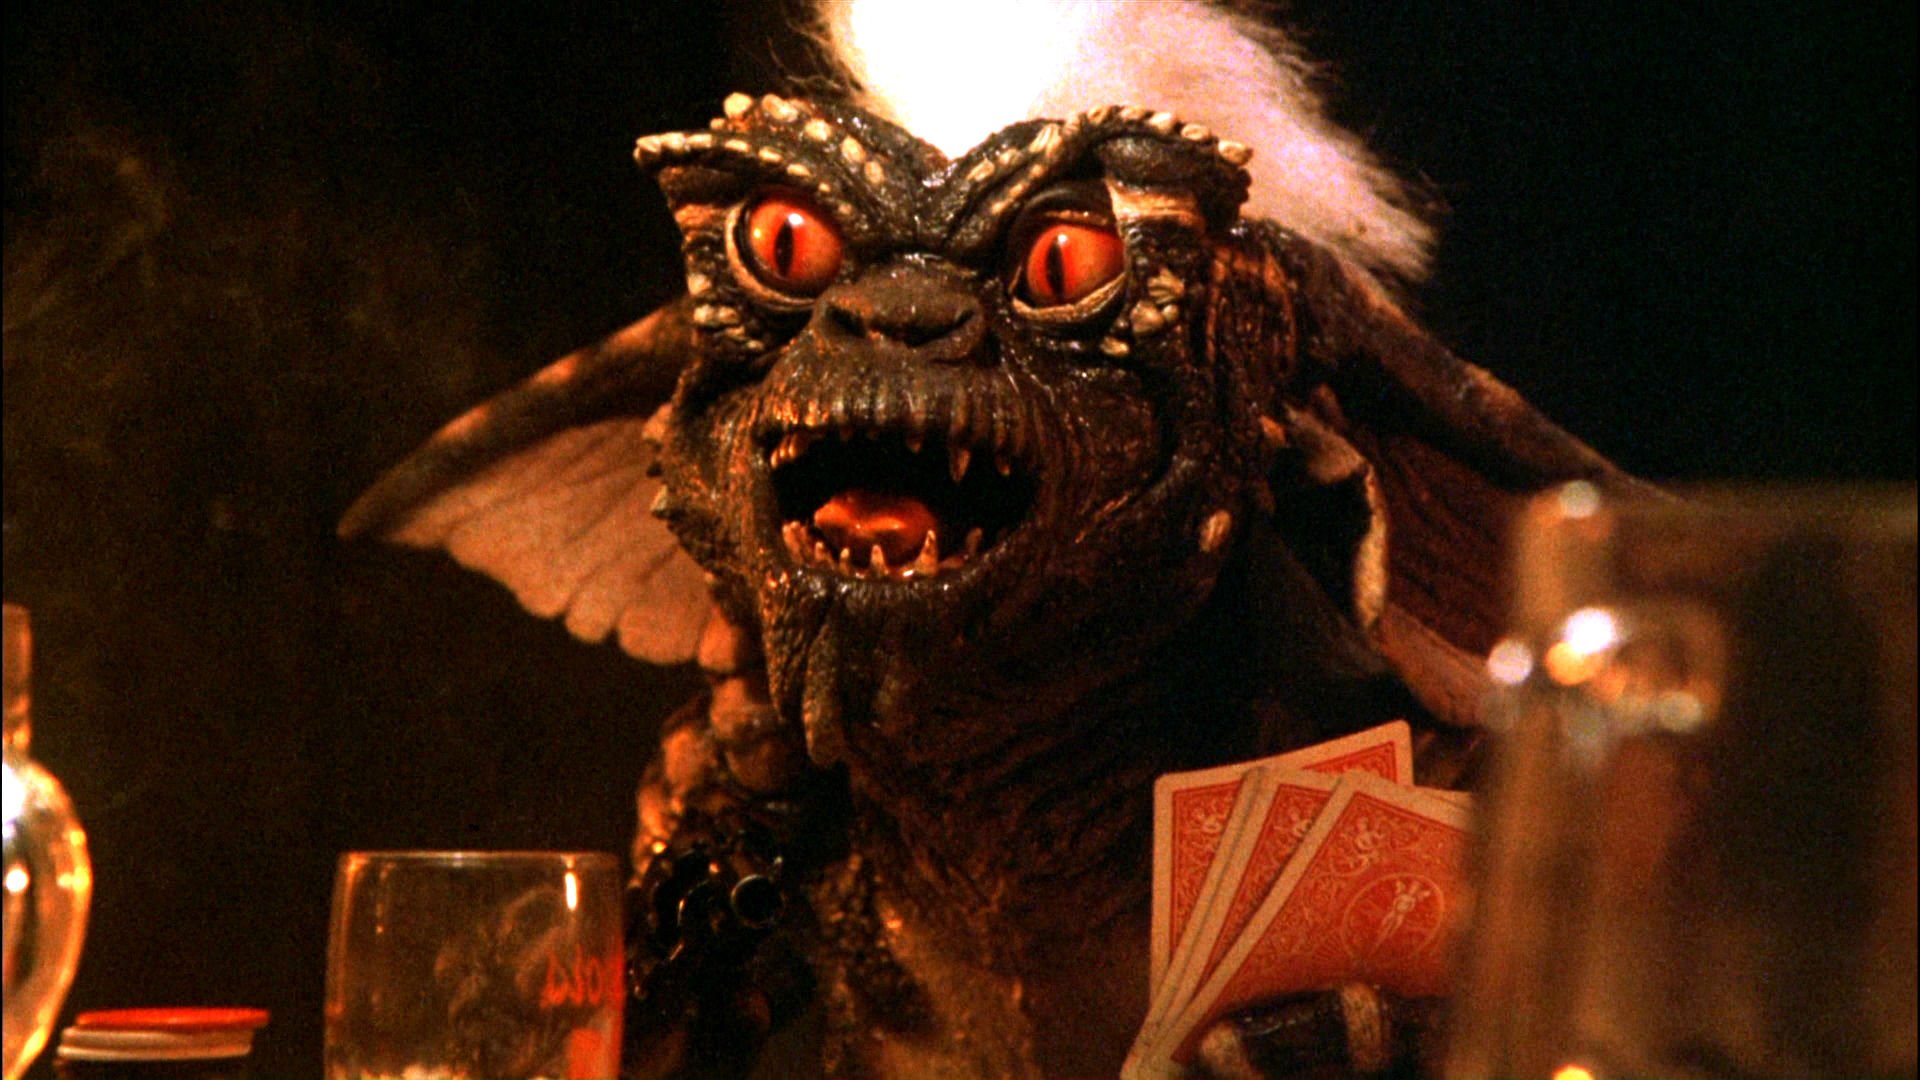 Download hd wallpapers of 252462-gremlins, Comedy, Horror, Creature, Monste...